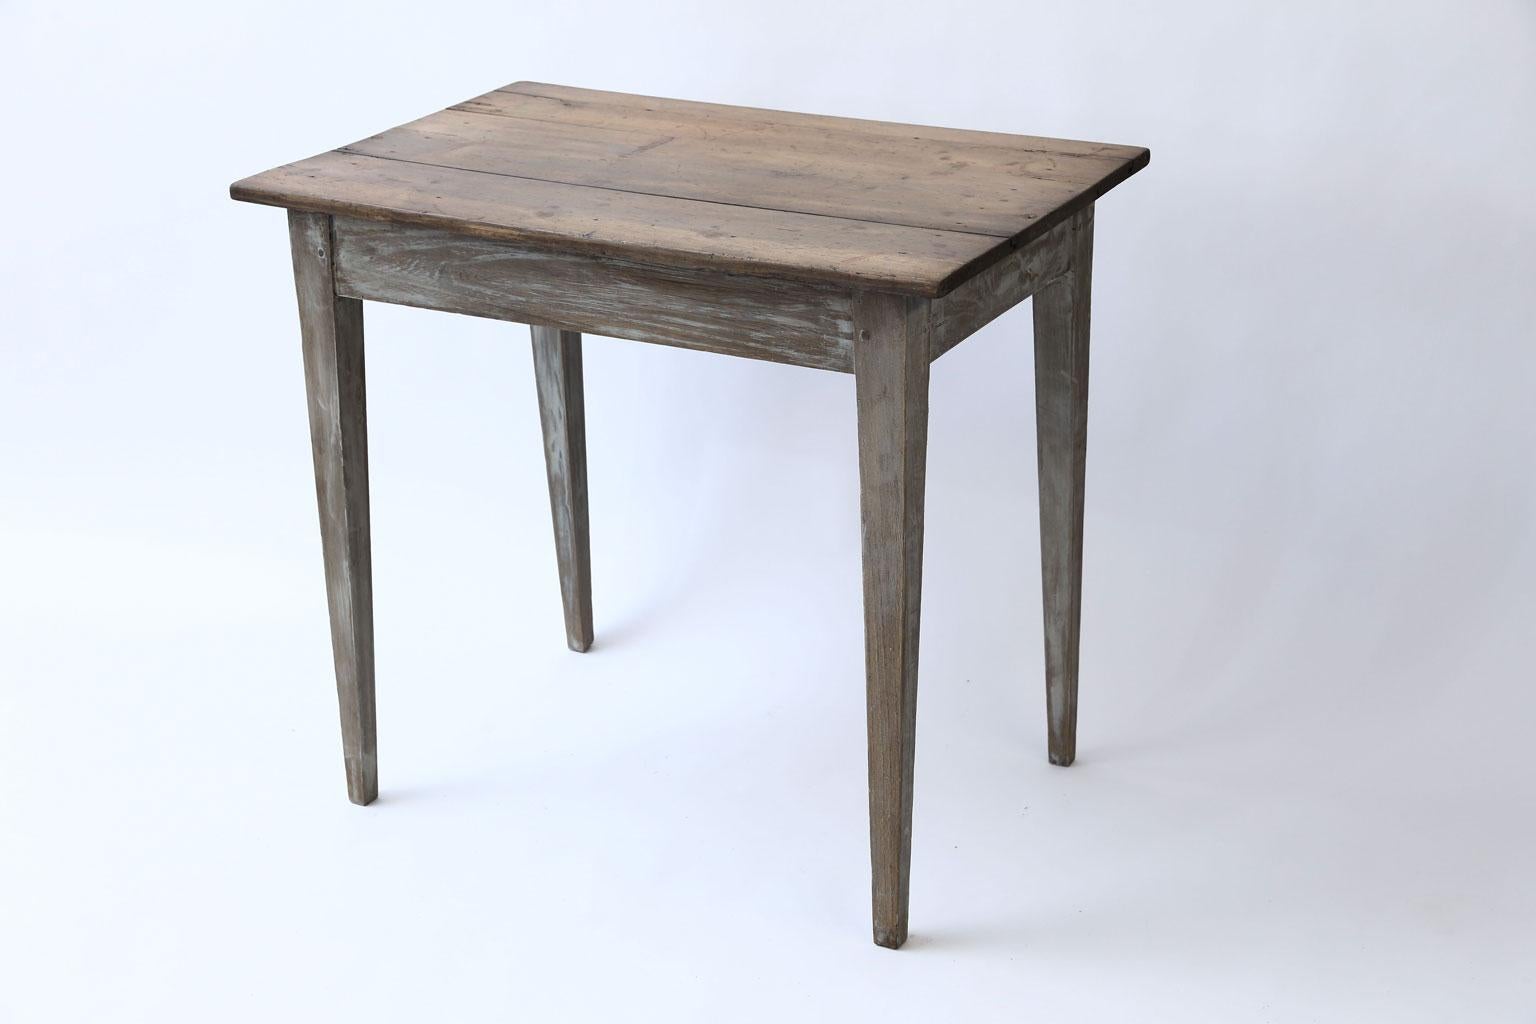 Swedish side table (circa 1840-1860), scrubbed and waxed top raised upon tapered leg base. Mortise and Tenon construction. Remnants of paint on base.